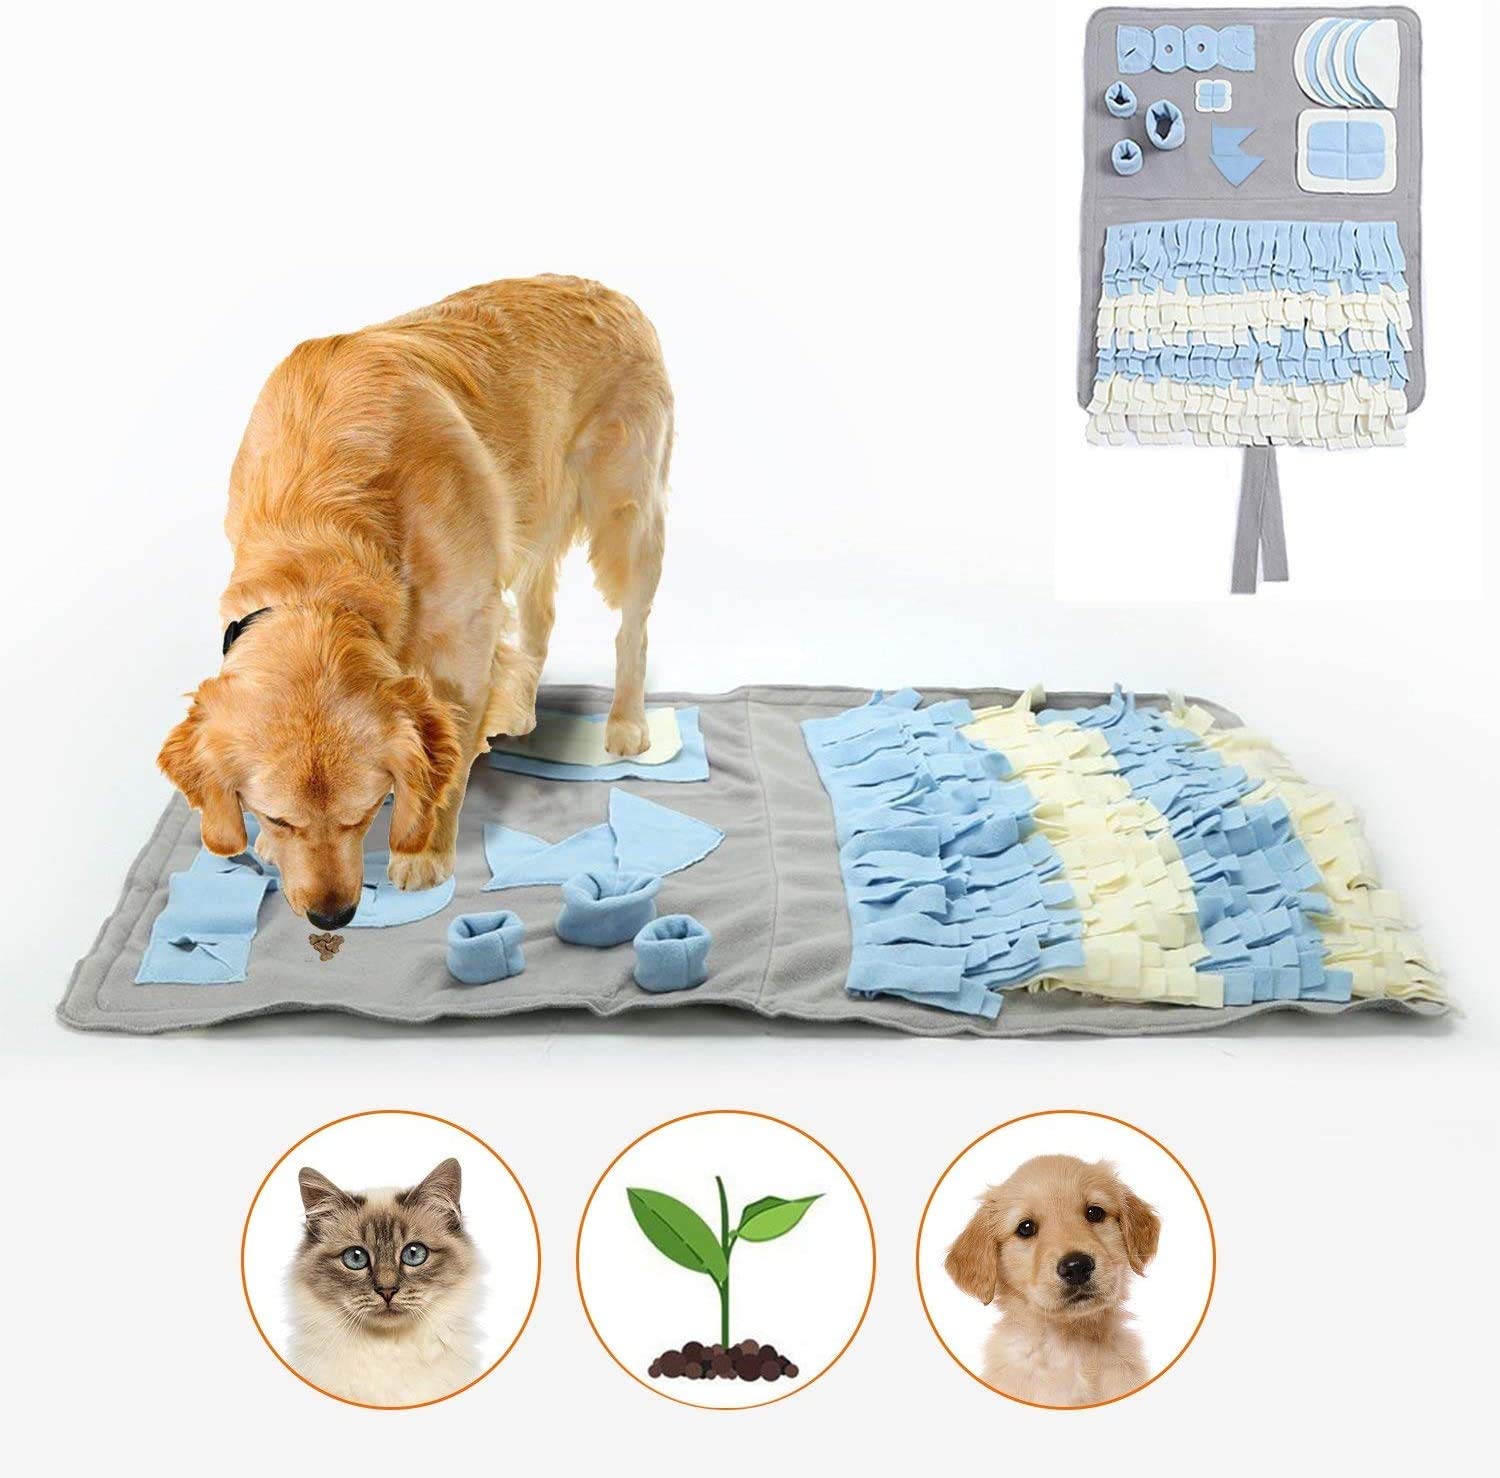 Btrice Pet Sniffing Teppich Hund Nase Teppich Sniffing Gras Hundespielzeug Foster Feeding Smart Toys Pet Sniffing Mat